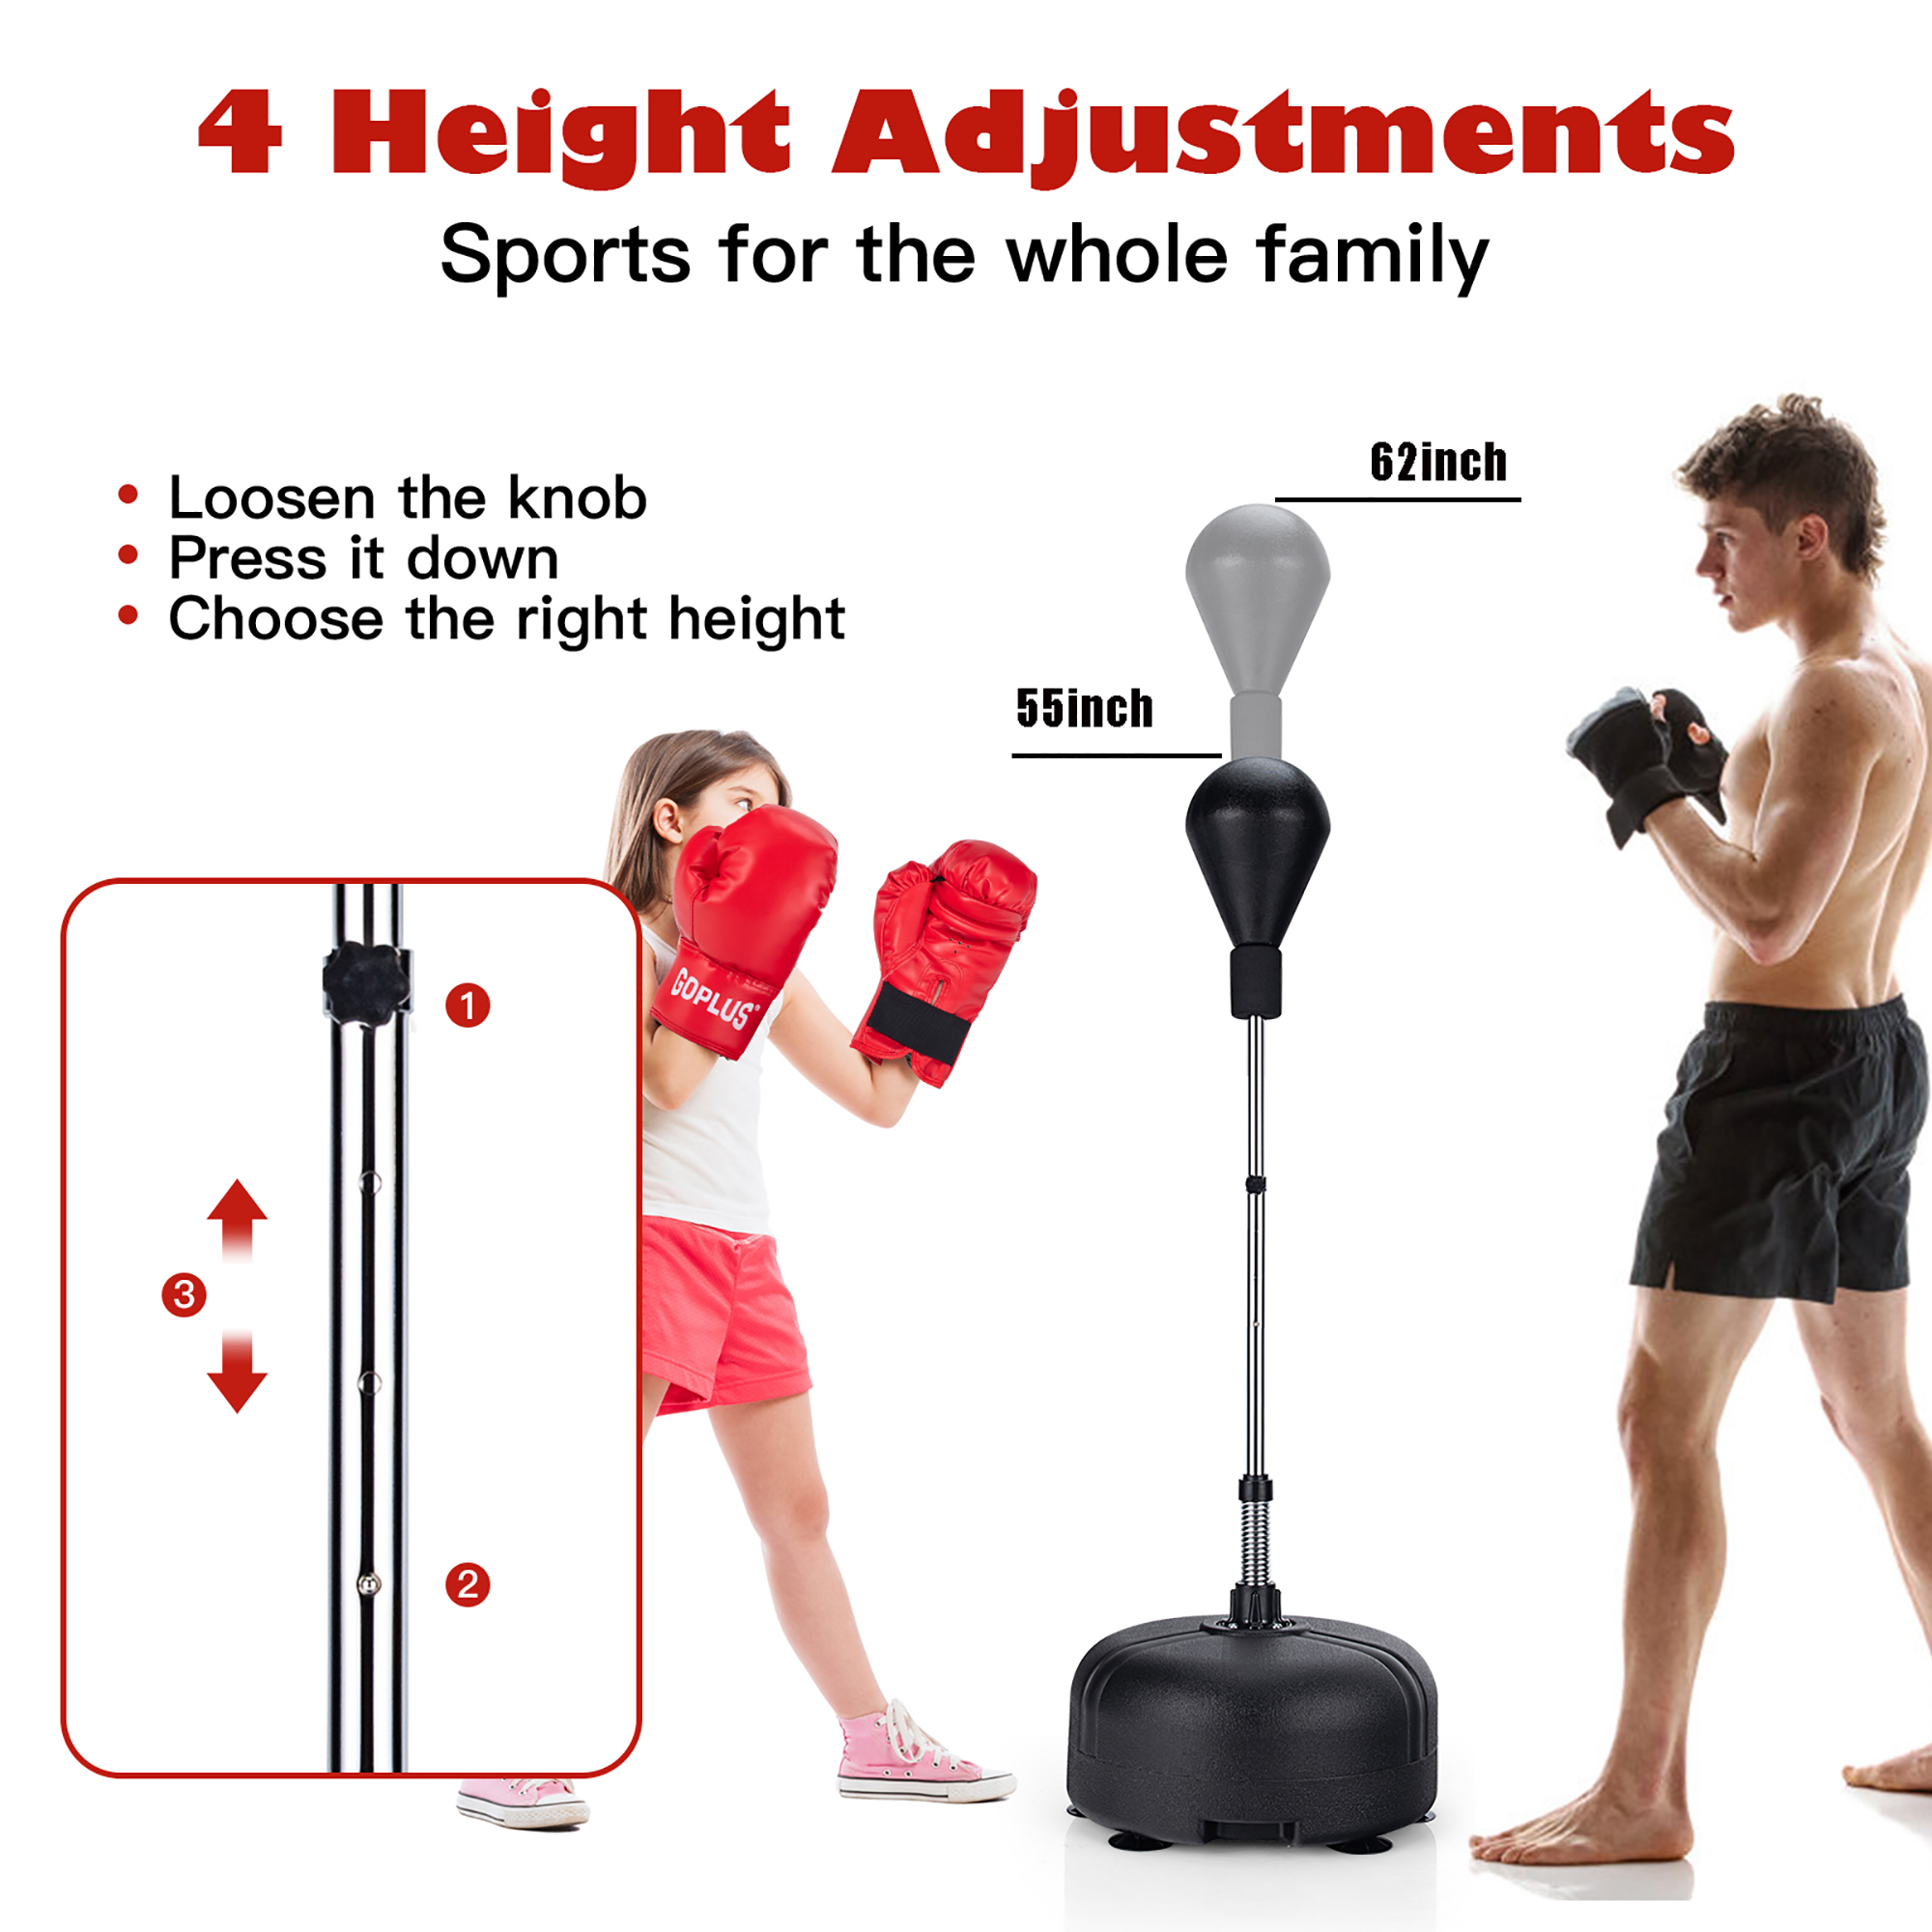 Costway Goplus Freestanding Punching Bag w/Stand Boxing Gloves for Adult Kids Adjustable